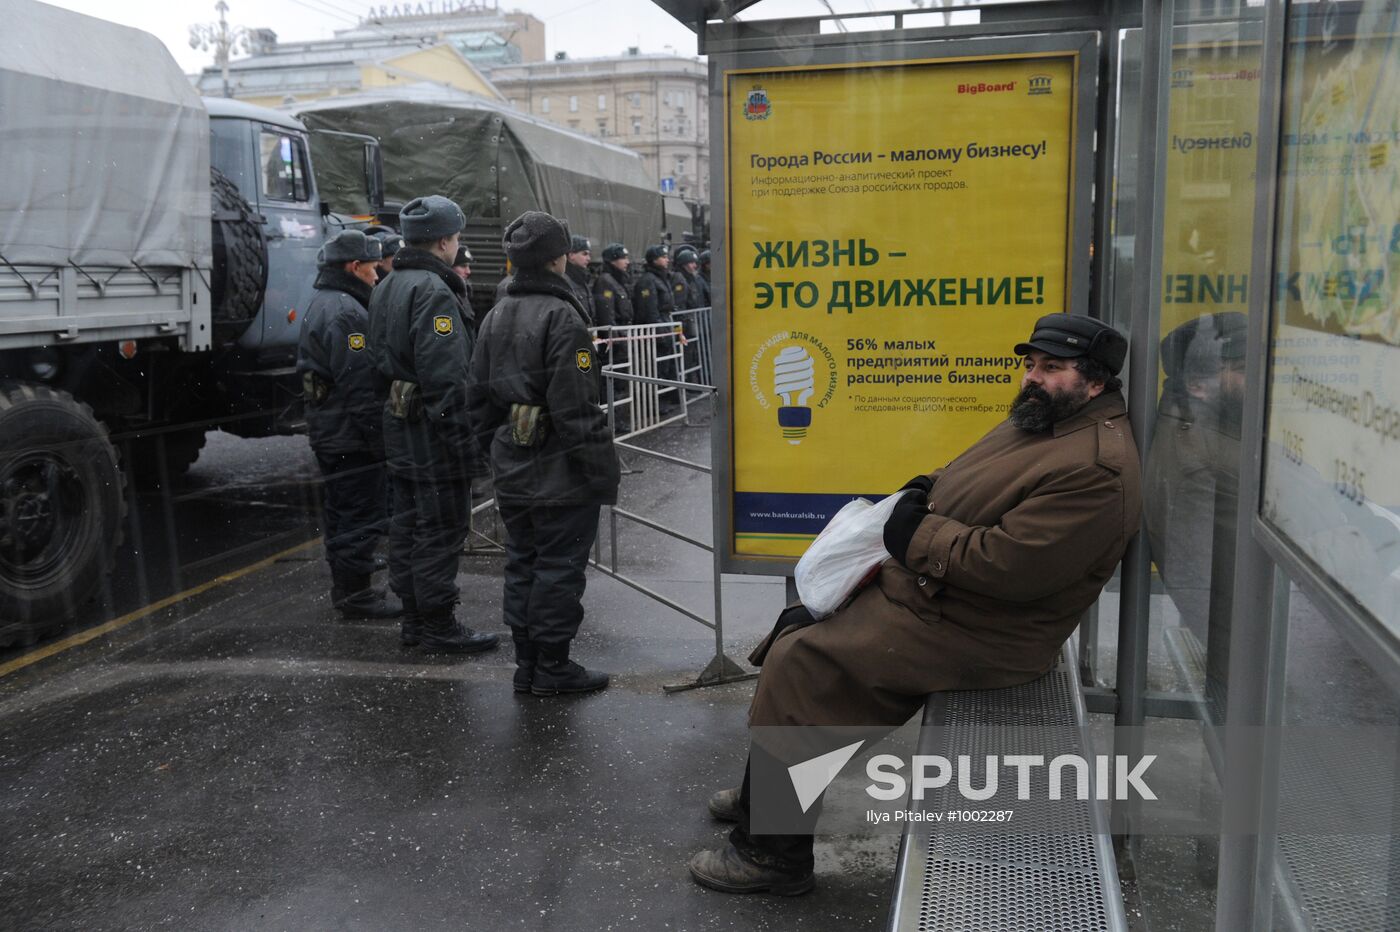 Enhanced security measures in Moscow